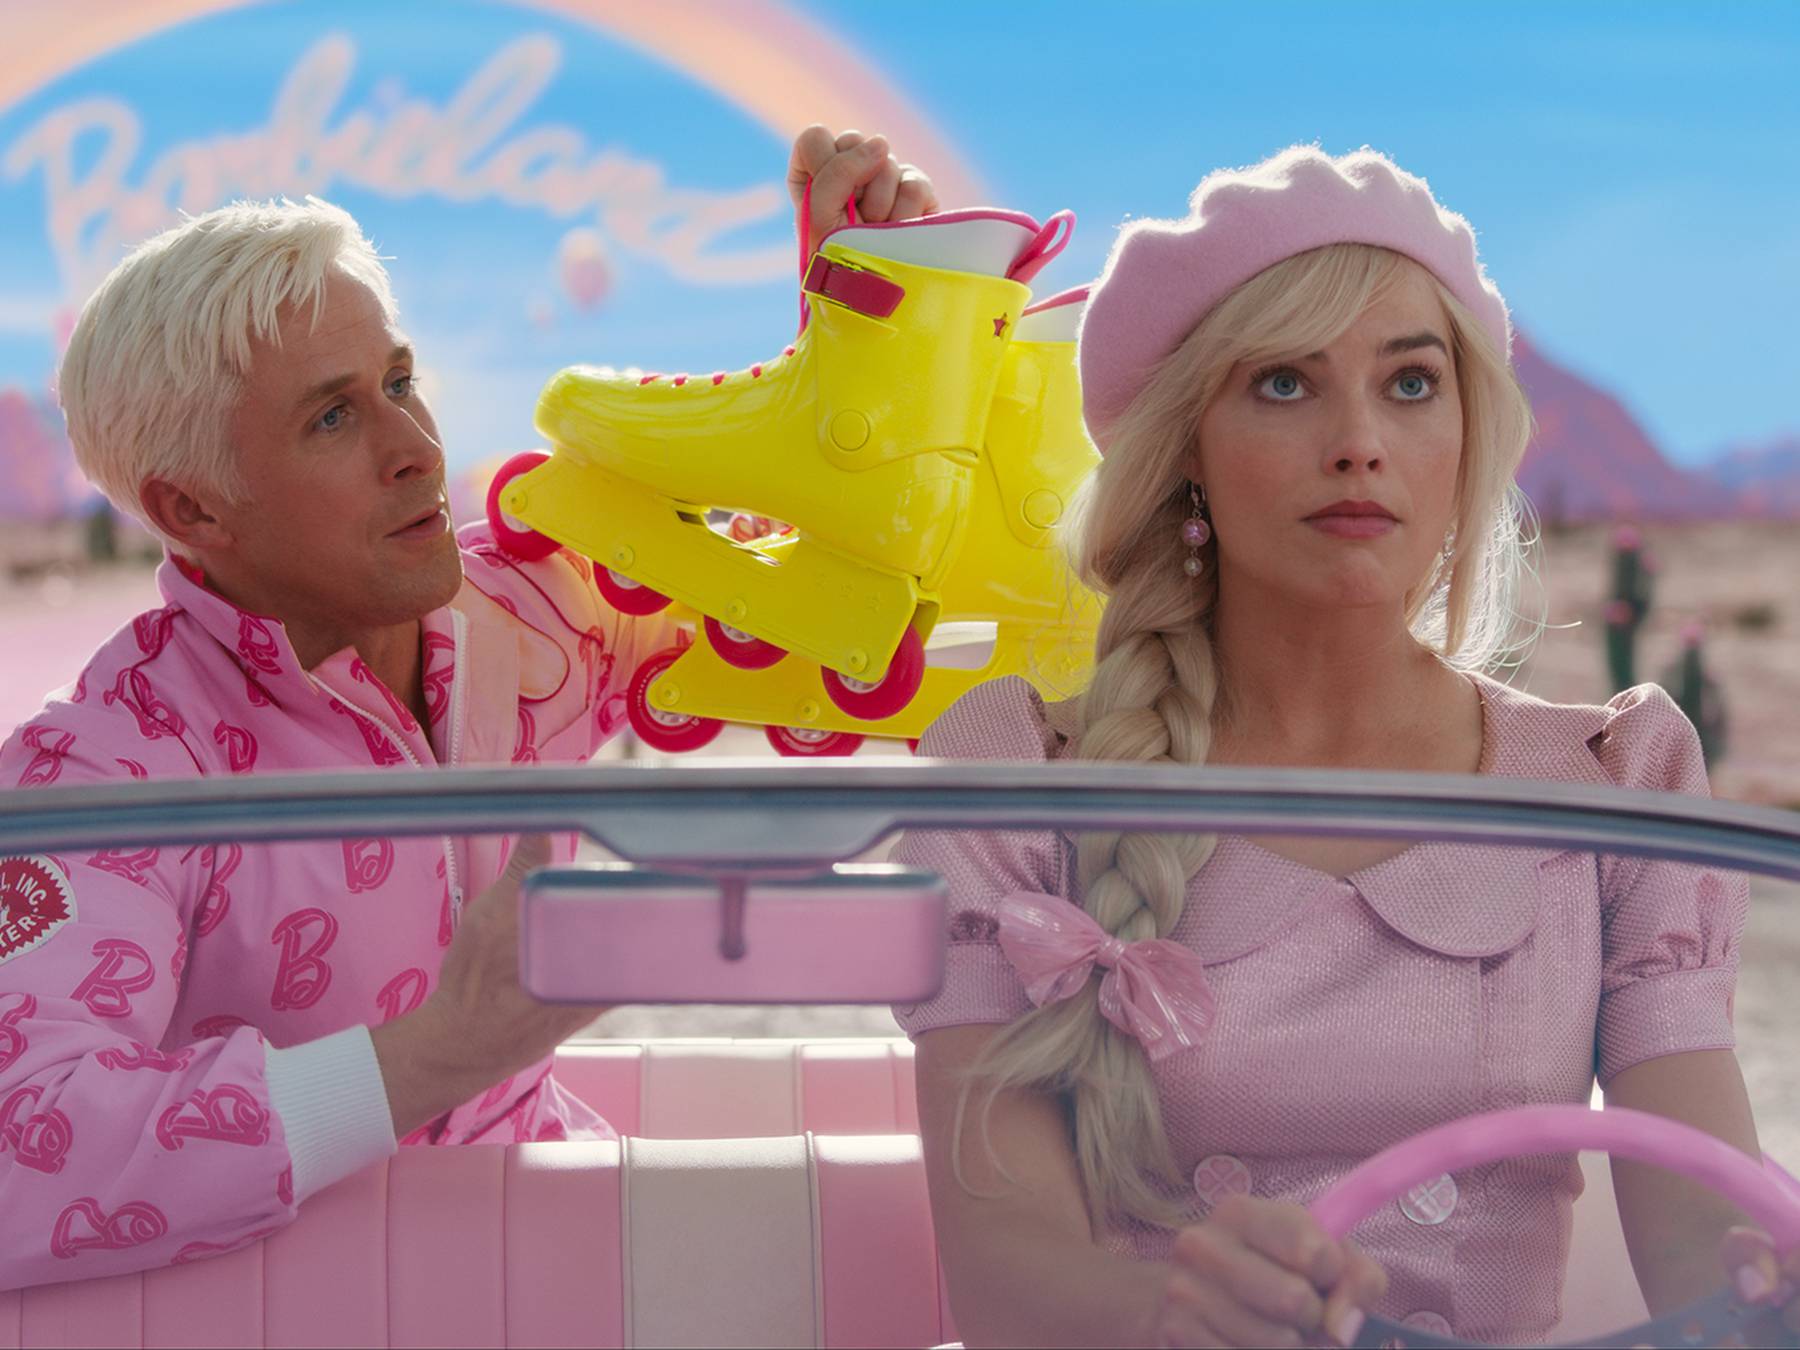 There was plenty of Chanel in the Barbie movie, here's why